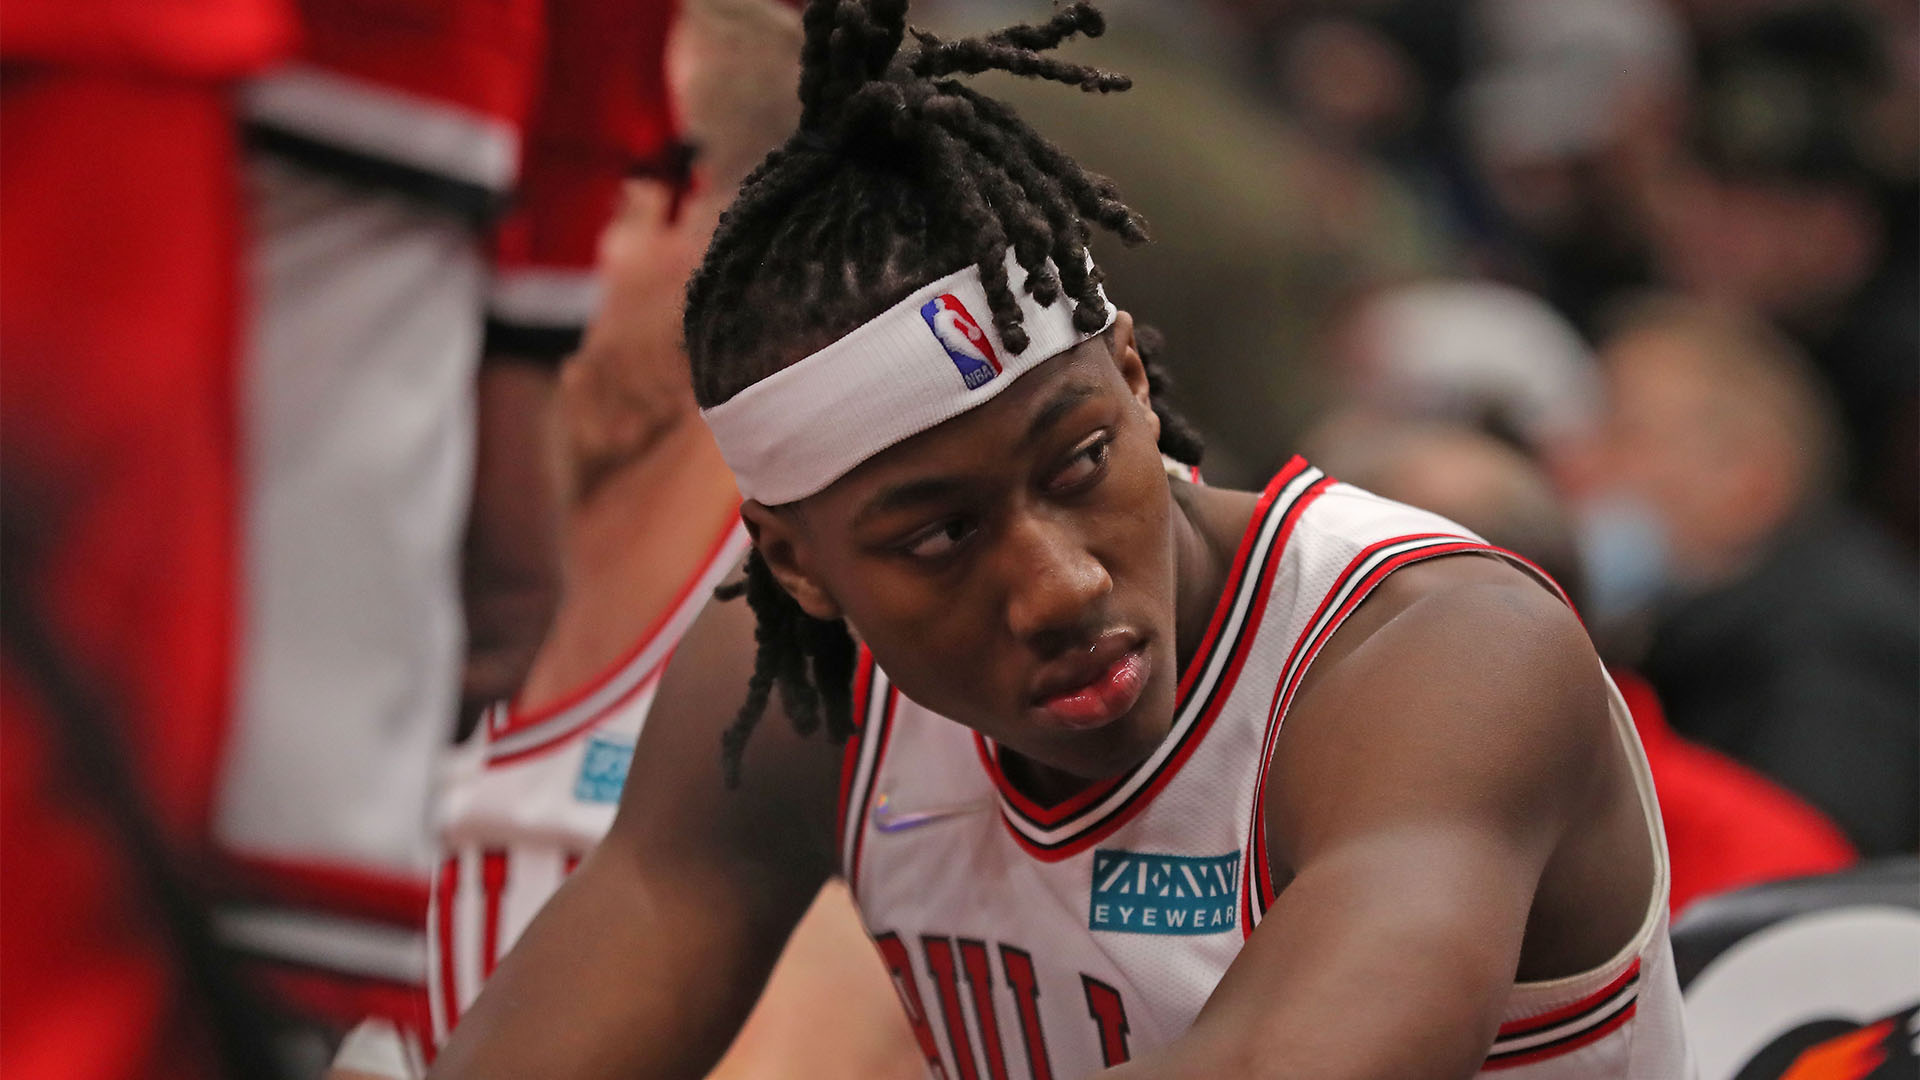 Ayo Dosunmu gets the starting nod for the Chicago Bulls